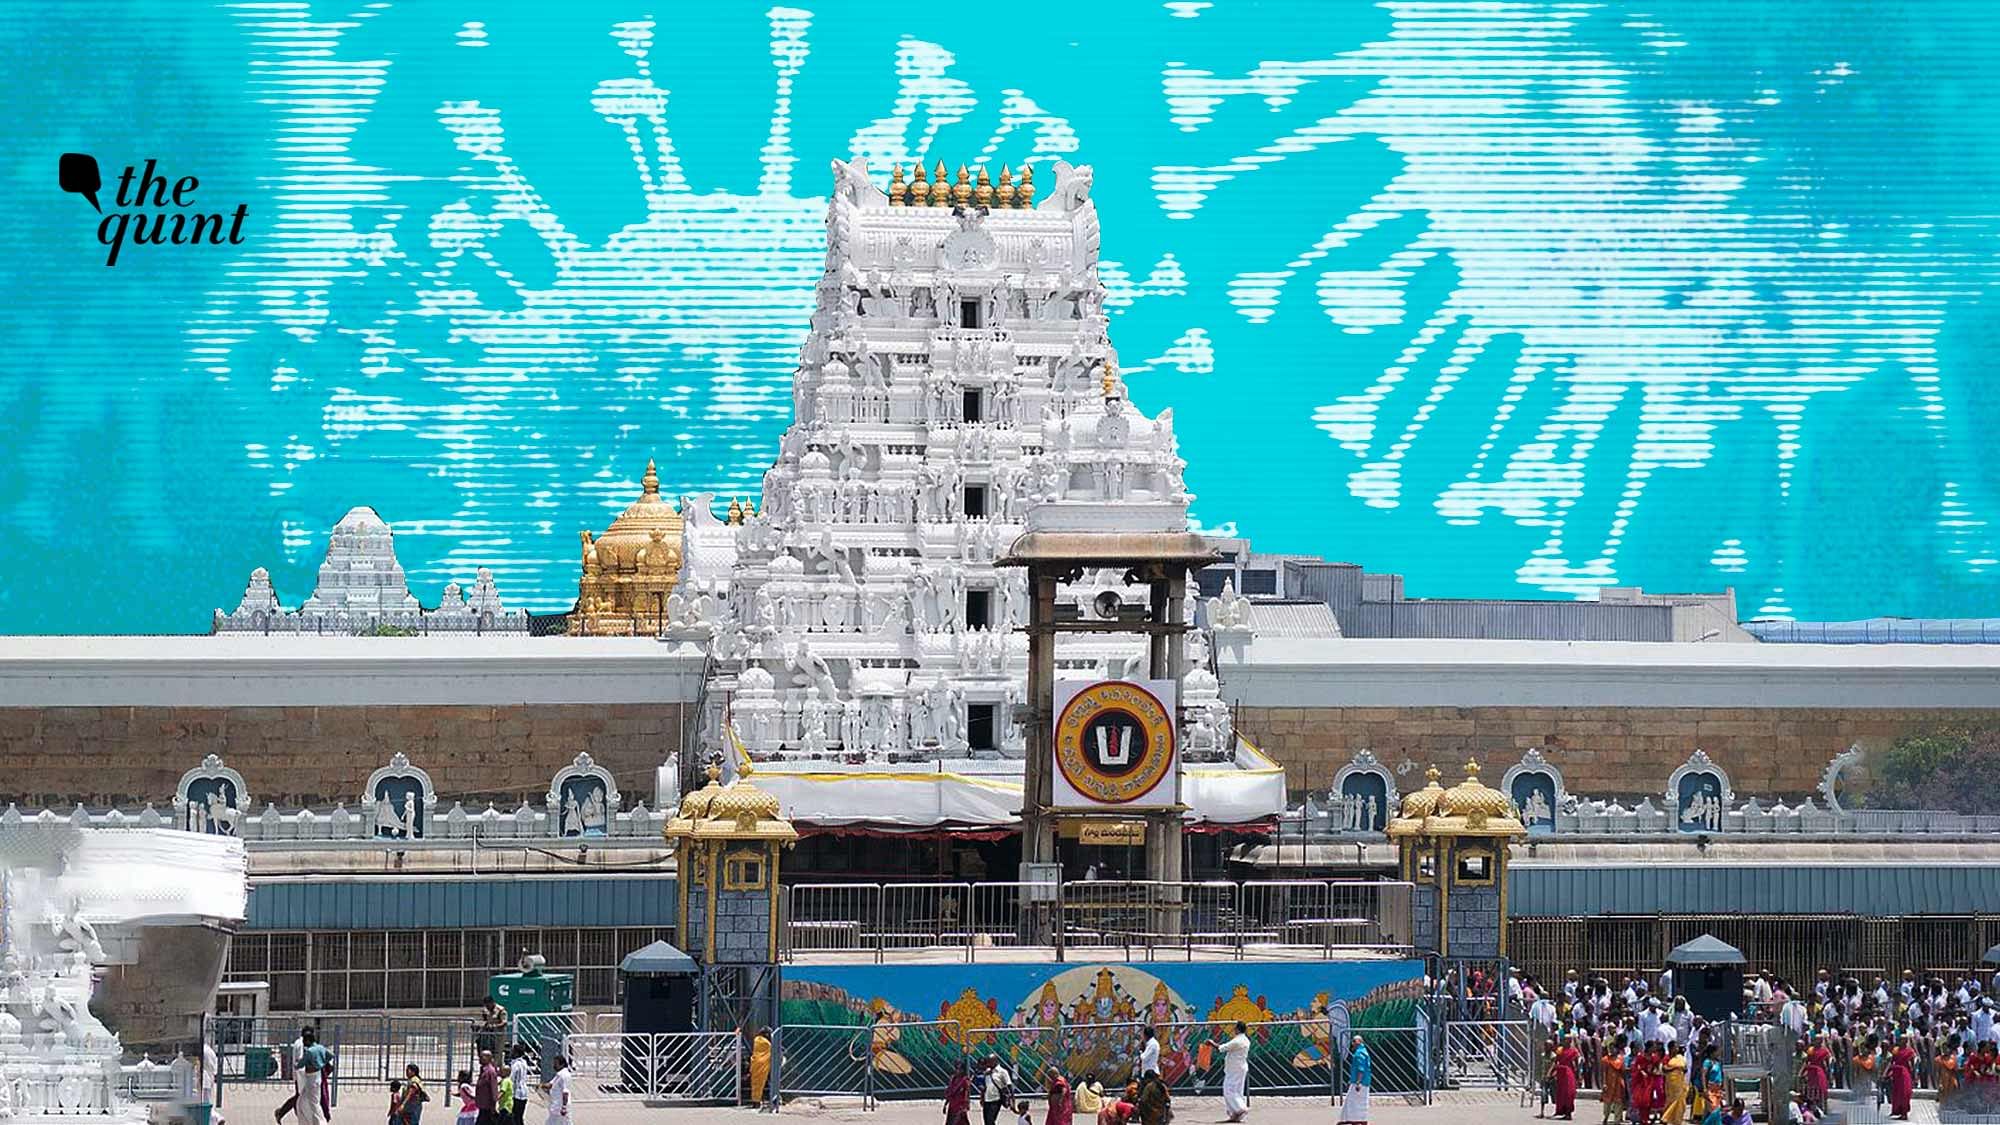 Over 700 cases of coronavirus have been detected among the staff of the Lord Venkateswara temple, also known as Tirumala Tirupati temple, in Andhra Pradesh.